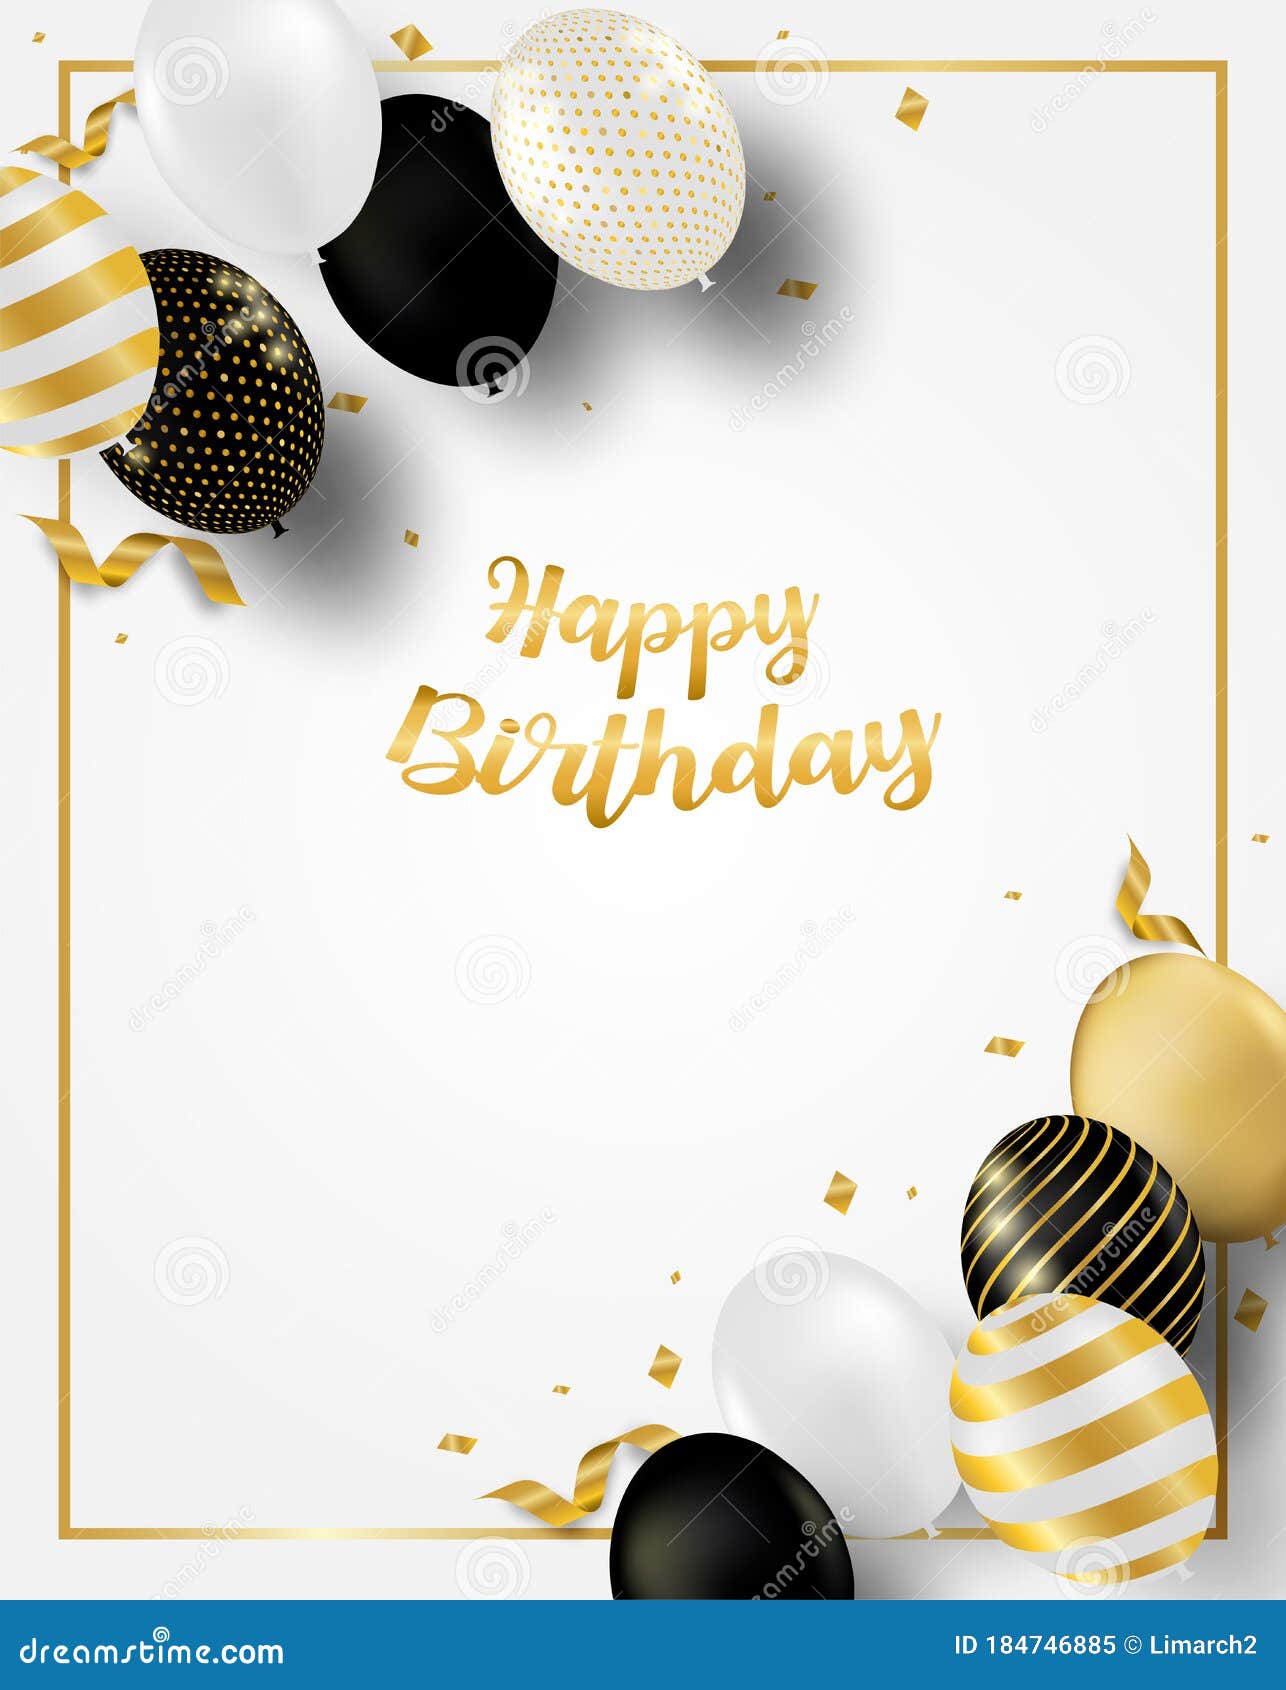 Happy Birthday Celebration Card. Design with Black, White, Gold Balloons  and Gold Foil Confetti Stock Vector - Illustration of ornate, frame:  184746885